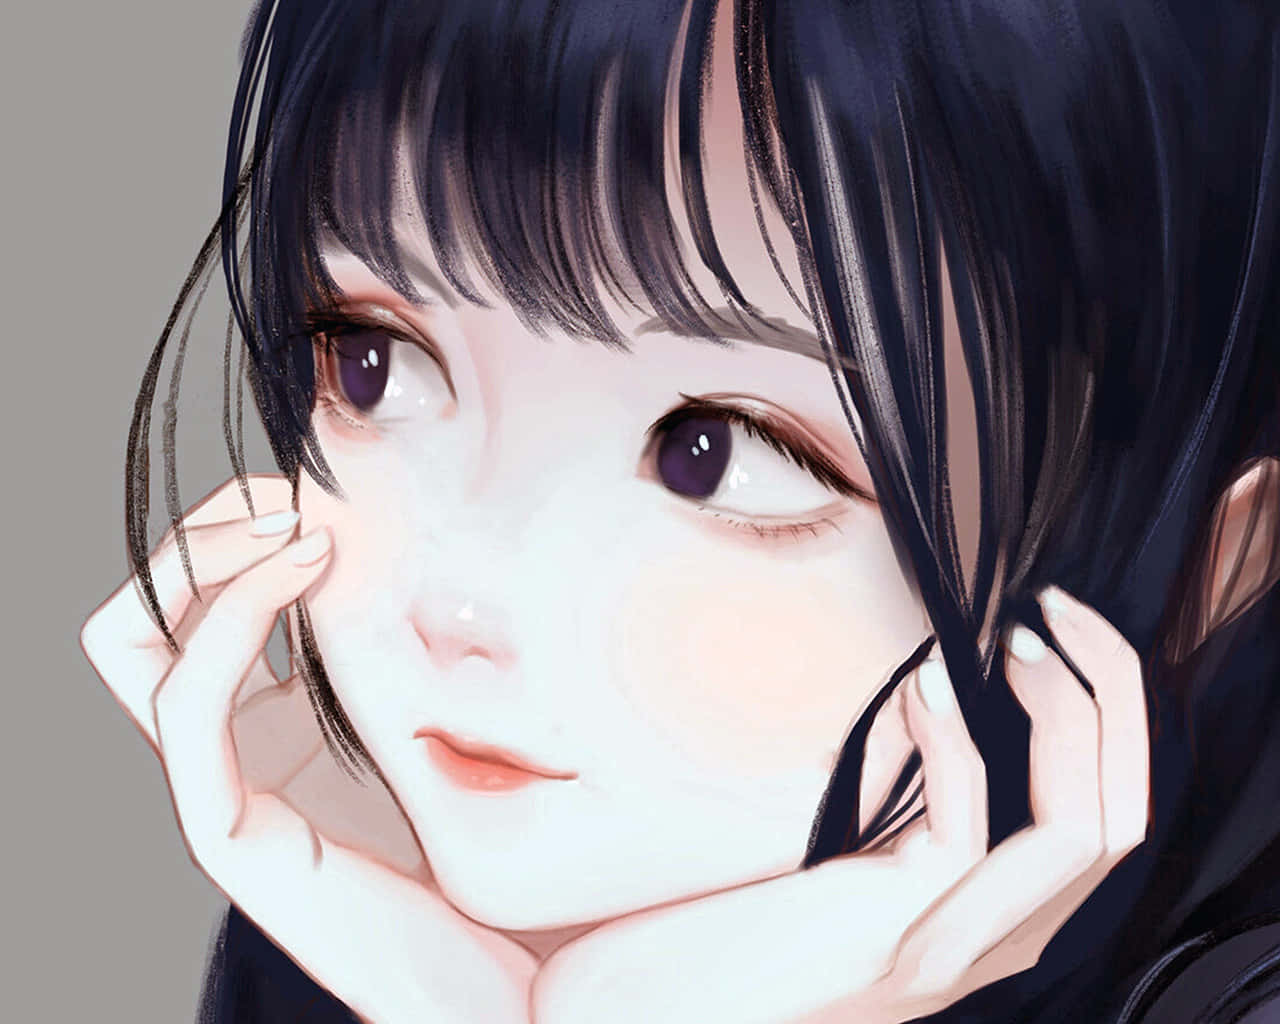 Paintover From Anime to SemiRealistic Digital Painting  Pigliicorn   Skillshare